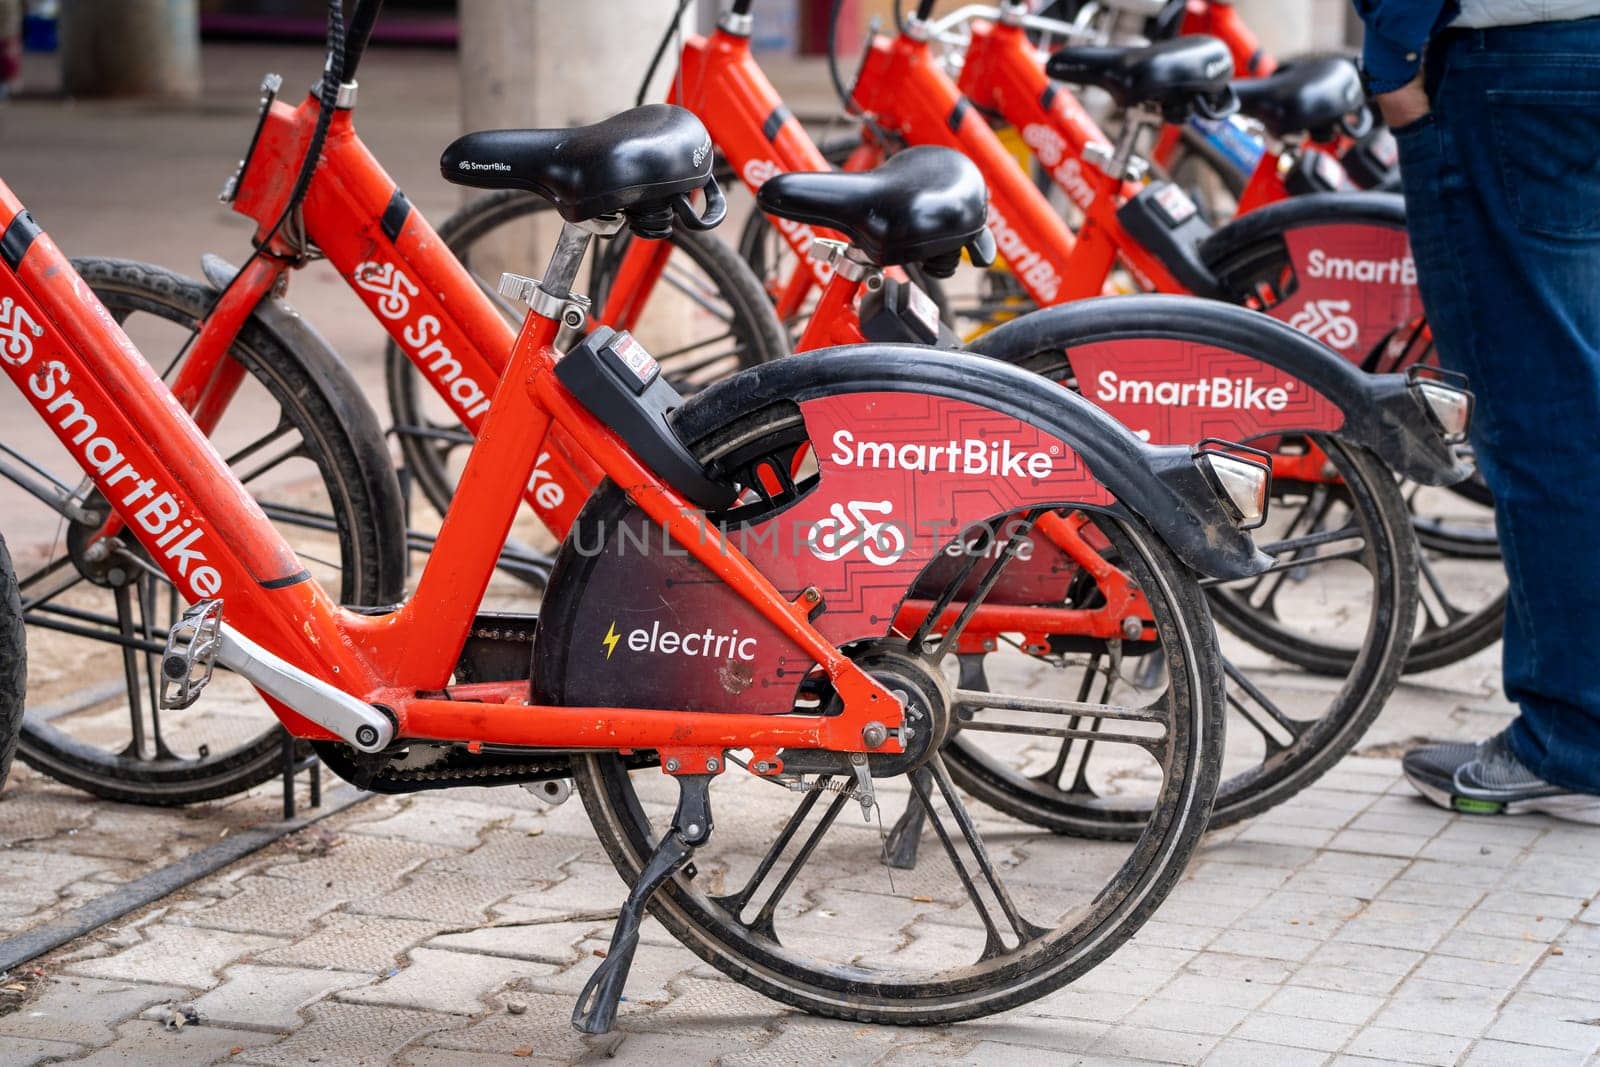 Chandigarh, Punjab, India - circa 2023 : cycle stand with red colored smart bikes standing for rent showing this internet mobility startup providing eco friendly cycles for hire